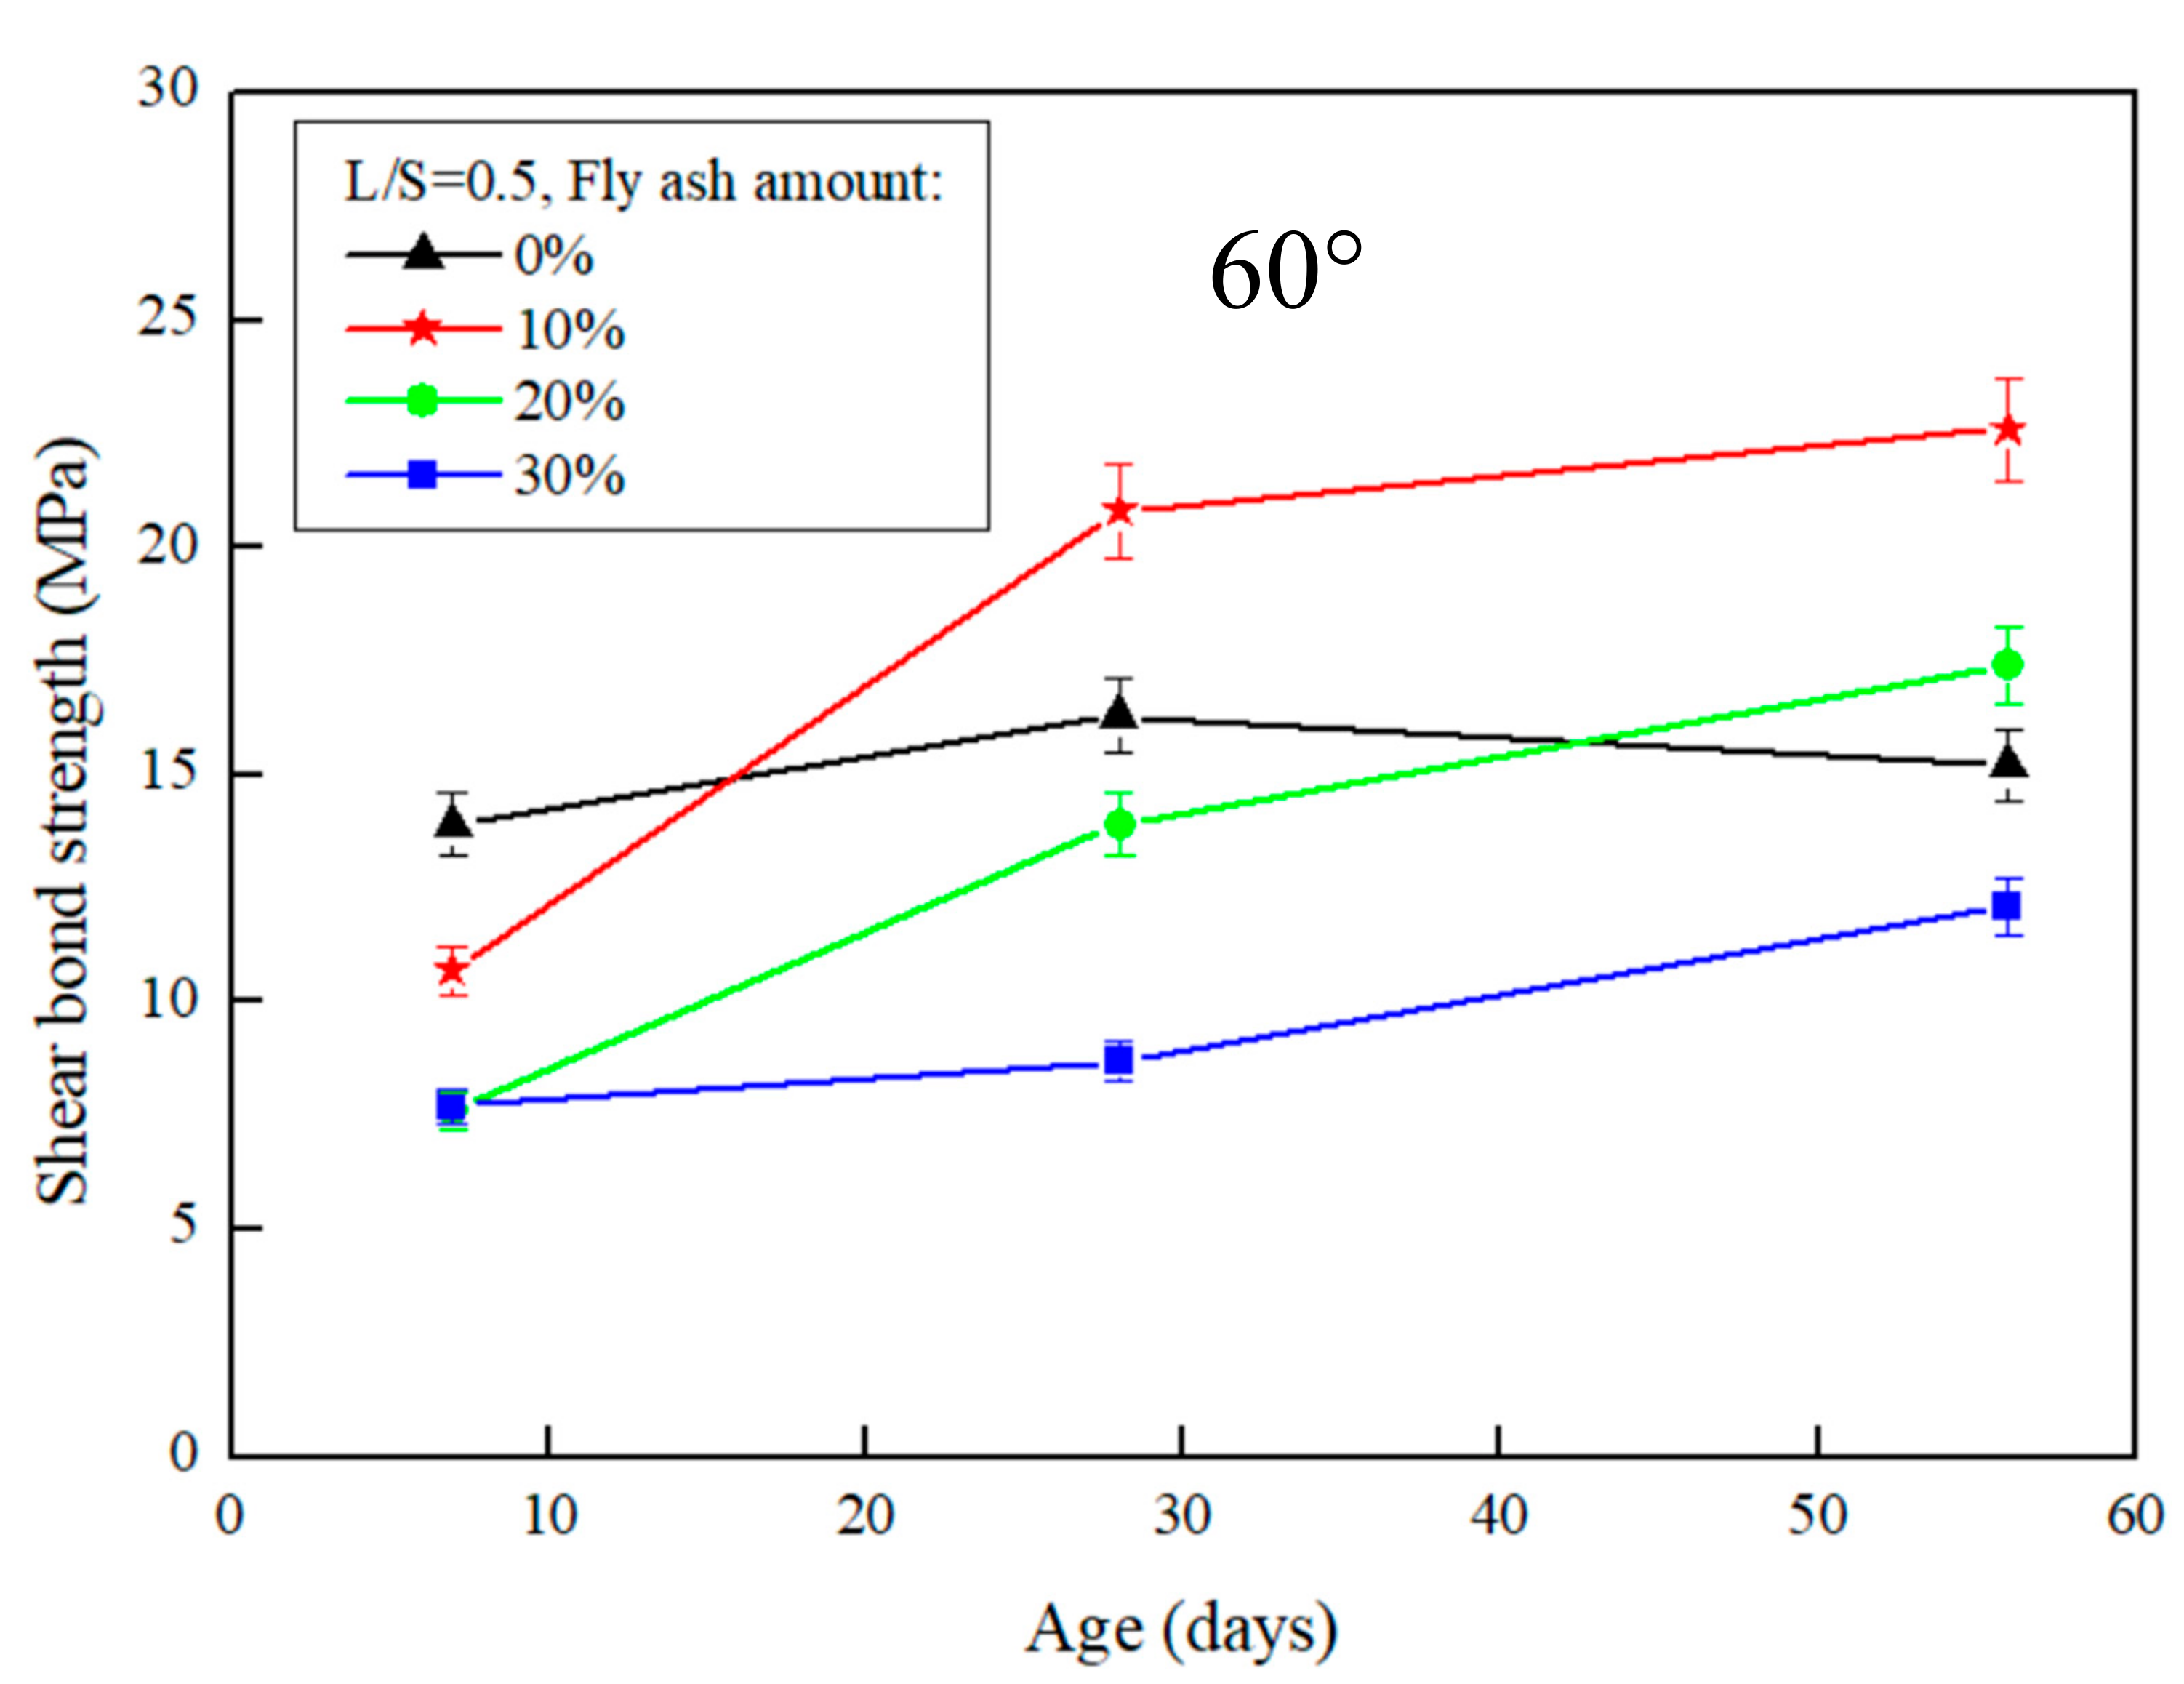 Evaluating Fly Ash-Based Geopolymers as a Modifier for Asphalt Binders